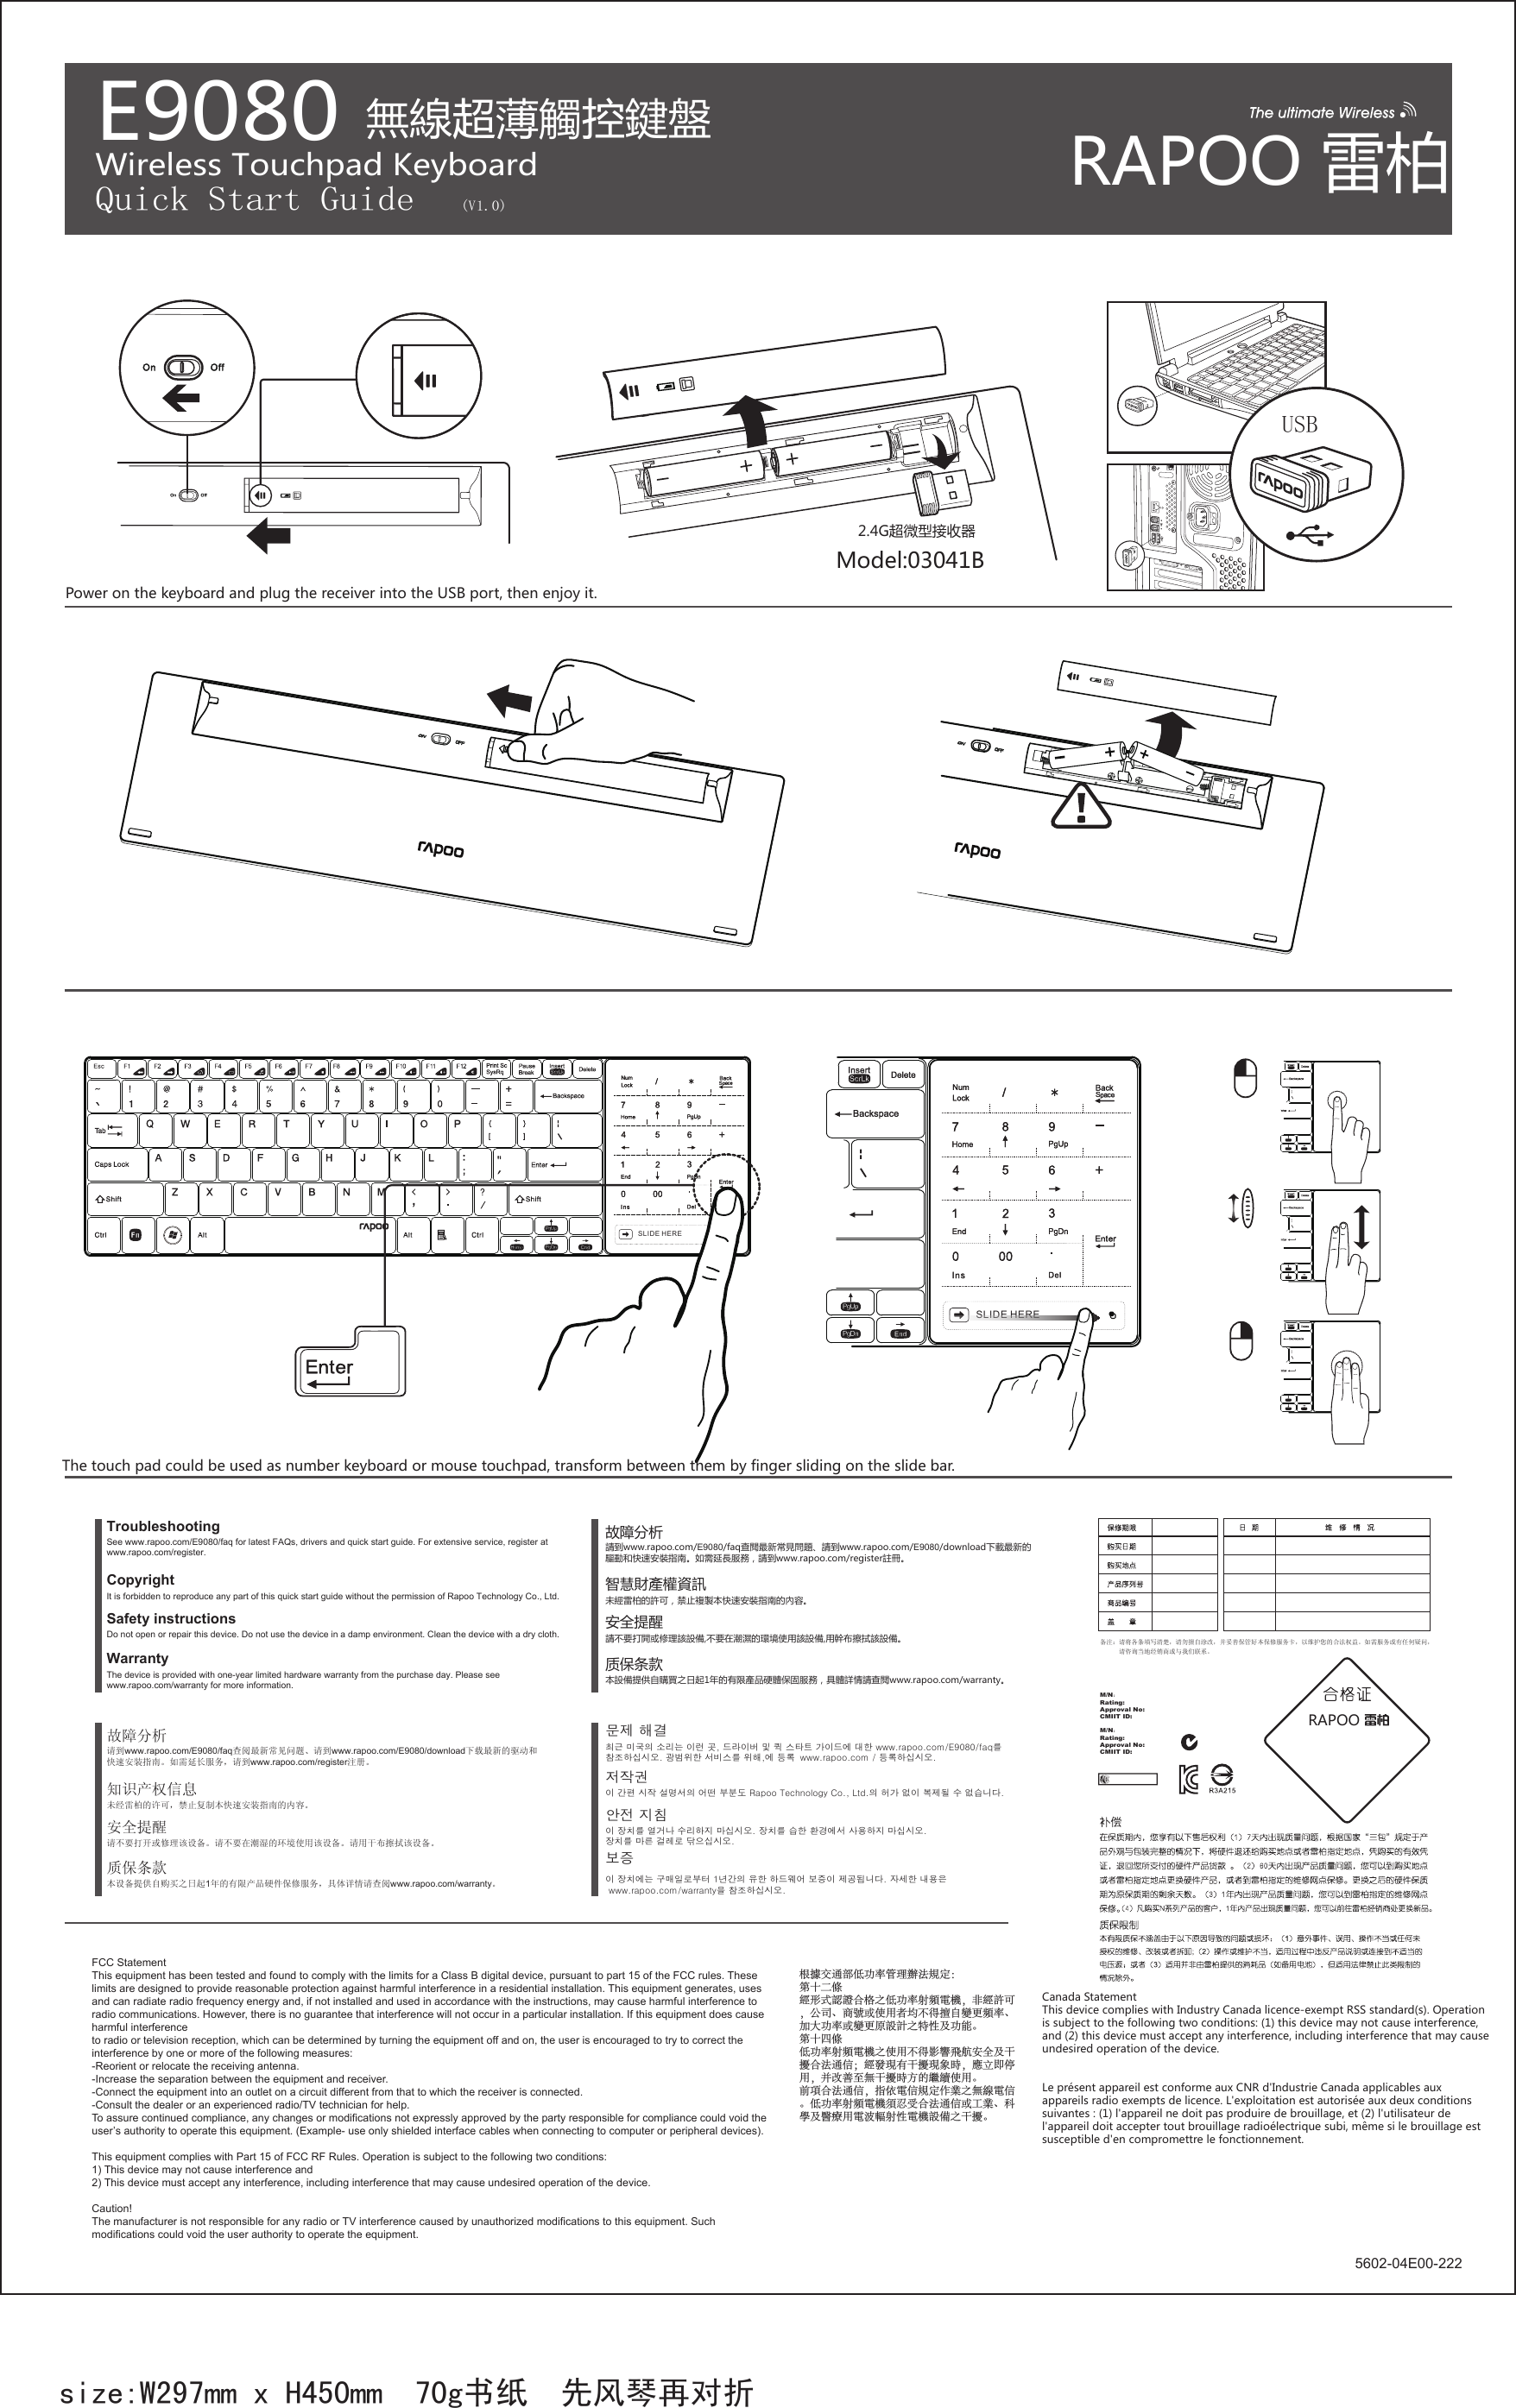 USBE9080Wireless Touchpad Keyboard Quick Start Guide (V1.0)size:W297mm x H450mm  70g书纸  先风琴再对折SLIDE HERESSSLIDE HERESS备注：请将各条填写清楚，请勿擅自涂改，并妥善保管好本保修服务卡，以维护您的合法权益。如需服务或有任何疑问，      请咨询当地经销商或与我们联系。M/N：                        Rating:                       Approval No:                  CMIIT ID:         M/N：                        Rating:                       Approval No:                  CMIIT ID:         5602-04E00-222WarrantyThe device is provided with one-year limited hardware warranty from the purchase day. Please see www.rapoo.com/warranty for more information.  See www.rapoo.com/E9080/faq for latest FAQs, drivers and quick start guide. For extensive service, register at www.rapoo.com/register.TroubleshootingDo not open or repair this device. Do not use the device in a damp environment. Clean the device with a dry cloth.Safety instructionsCopyright It is forbidden to reproduce any part of this quick start guide without the permission of Rapoo Technology Co., Ltd. 质保条款本設備提供自購買之日起1年的有限產品硬體保固服務，具體詳情請查閱www.rapoo.com/warranty。請到www.rapoo.com/E9080/faq查閱最新常見問題、請到www.rapoo.com/E9080/download下載最新的驅動和快速安裝指南。如需延長服務，請到www.rapoo.com/register註冊。故障分析請不要打開或修理該設備,不要在潮濕的環境使用該設備,用幹布擦拭該設備。安全提醒智慧財產權資訊未經雷柏的許可，禁止複製本快速安裝指南的內容。质保条款本设备提供自购买之日起1年的有限产品硬件保修服务，具体详情请查阅www.rapoo.com/warranty。请到www.rapoo.com/E9080/faq查阅最新常见问题、请到www.rapoo.com/E9080/download下载最新的驱动和快速安装指南。如需延长服务，请到www.rapoo.com/register注册。故障分析请不要打开或修理该设备。请不要在潮湿的环境使用该设备。请用干布擦拭该设备。安全提醒知识产权信息未经雷柏的许可，禁止复制本快速安装指南的内容。보증안전 지침이 장치를 열거나 수리하지 마십시오. 장치를 습한 환경에서 사용하지 마십시오.장치를 마른 걸레로 닦으십시오.이 장치에는 구매일로부터 1년간의 유한 하드웨어 보증이 제공됩니다. 자세한 내용은 www.rapoo.com/warranty을 참조하십시오.저작권 이 간편 시작 설명서의 어떤 부분도 Rapoo Technology Co., Ltd.의 허가 없이 복제될 수 없습니다.최근 미국의 소리는 이런 곳, 드라이버 및 퀵 스타트 가이드에 대한 www.rapoo.com/E9080/faq를 참조하십시오. 광범위한 서비스를 위해,에 등록  www.rapoo.com / 등록하십시오.문제 해결FCC StatementThis equipment has been tested and found to comply with the limits for a Class B digital device, pursuant to part 15 of the FCC rules. These limits are designed to provide reasonable protection against harmful interference in a residential installation. This equipment generates, uses and can radiate radio frequency energy and, if not installed and used in accordance with the instructions, may cause harmful interference to radio communications. However, there is no guarantee that interference will not occur in a particular installation. If this equipment does cause harmful interference to radio or television reception, which can be determined by turning the equipment off and on, the user is encouraged to try to correct the interference by one or more of the following measures:-Reorient or relocate the receiving antenna.-Increase the separation between the equipment and receiver.-Connect the equipment into an outlet on a circuit different from that to which the receiver is connected.-Consult the dealer or an experienced radio/TV technician for help.To assure continued compliance, any changes or modifications not expressly approved by the party responsible for compliance could void the user’s authority to operate this equipment. (Example- use only shielded interface cables when connecting to computer or peripheral devices).This equipment complies with Part 15 of FCC RF Rules. Operation is subject to the following two conditions:1) This device may not cause interference and2) This device must accept any interference, including interference that may cause undesired operation of the device.Caution! The manufacturer is not responsible for any radio or TV interference caused by unauthorized modifications to this equipment. Such modifications could void the user authority to operate the equipment. 根據交通部低功率管理辦法規定：第十二條經形式認證合格之低功率射頻電機，非經許可，公司、商號或使用者均不得擅自變更頻率、加大功率或變更原設計之特性及功能。第十四條低功率射頻電機之使用不得影響飛航安全及干擾合法通信；經發現有干擾現象時，應立即停用，并改善至無干擾時方的繼續使用。前項合法通信，指依電信規定作業之無線電信。低功率射頻電機須忍受合法通信或工業、科學及醫療用電波輻射性電機設備之干擾。無線超薄觸控鍵盤2.4G超微型接收器RAPOO 雷柏Canada Statement  This device complies with Industry Canada licence-exempt RSS standard(s). Operation is subject to the following two conditions: (1) this device may not cause interference, and (2) this device must accept any interference, including interference that may cause undesired operation of the device. Le présent appareil est conforme aux CNR d&apos;Industrie Canada applicables aux appareils radio exempts de licence. L&apos;exploitation est autorisée aux deux conditions suivantes : (1) l&apos;appareil ne doit pas produire de brouillage, et (2) l&apos;utilisateur de l&apos;appareil doit accepter tout brouillage radioélectrique subi, même si le brouillage est susceptible d&apos;en compromettre le fonctionnement.RAPOOModel:03041BPower on the keyboard and plug the receiver into the USB port, then enjoy it.The touch pad could be used as number keyboard or mouse touchpad, transform between them by finger sliding on the slide bar.